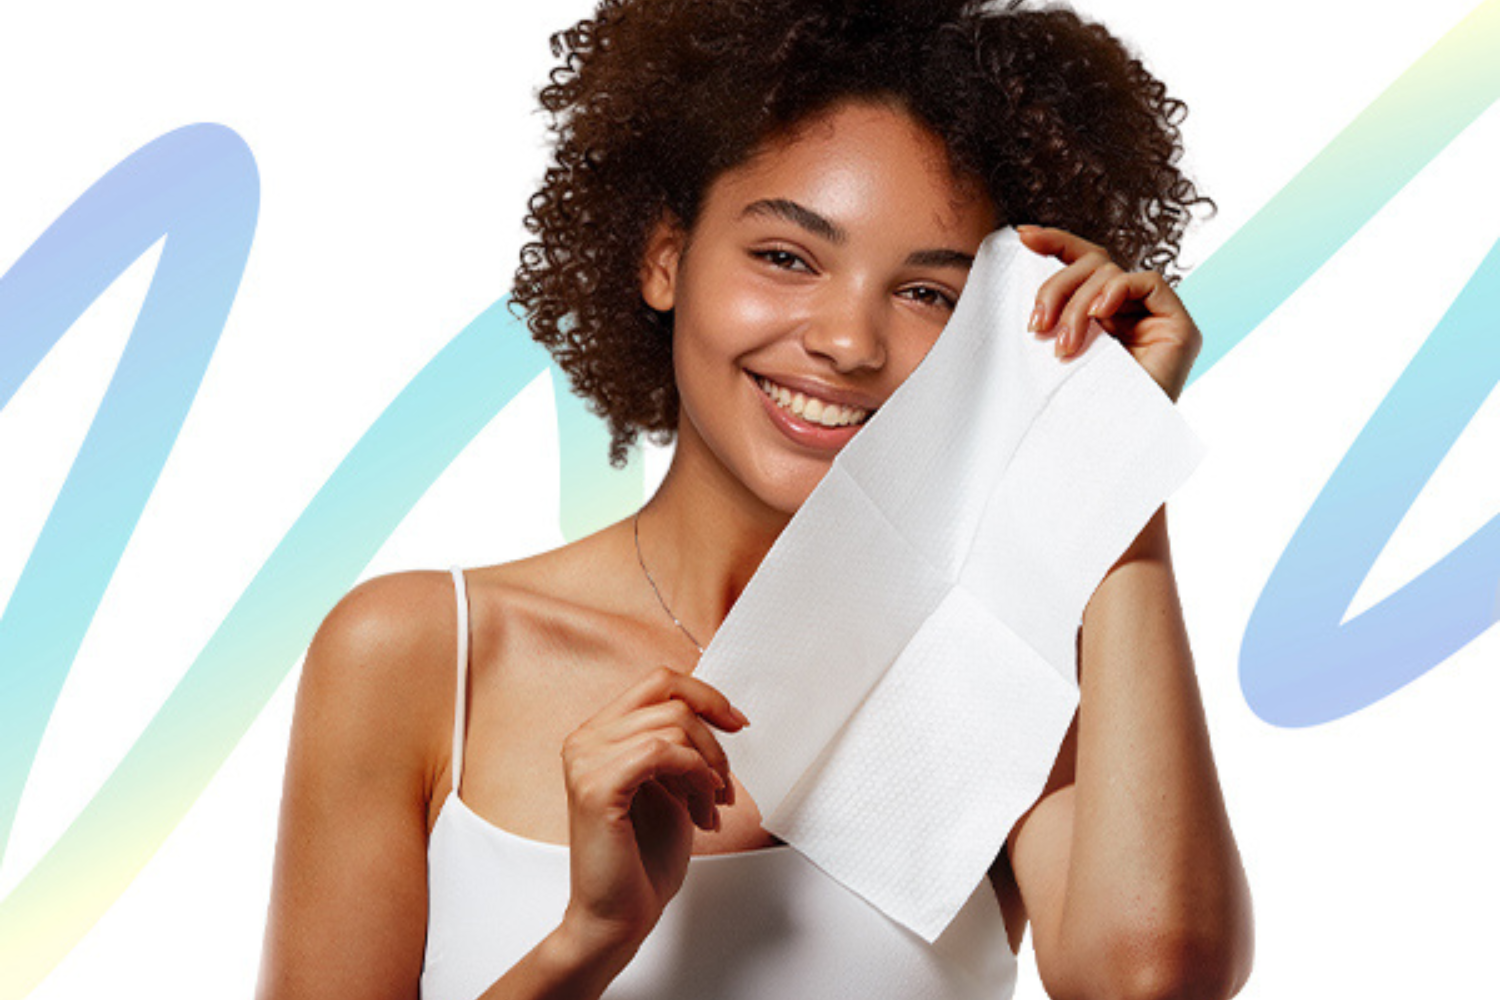 Convenient & Hygienic Disposable Face Towels: Perfect for a Clean, Fresh Face